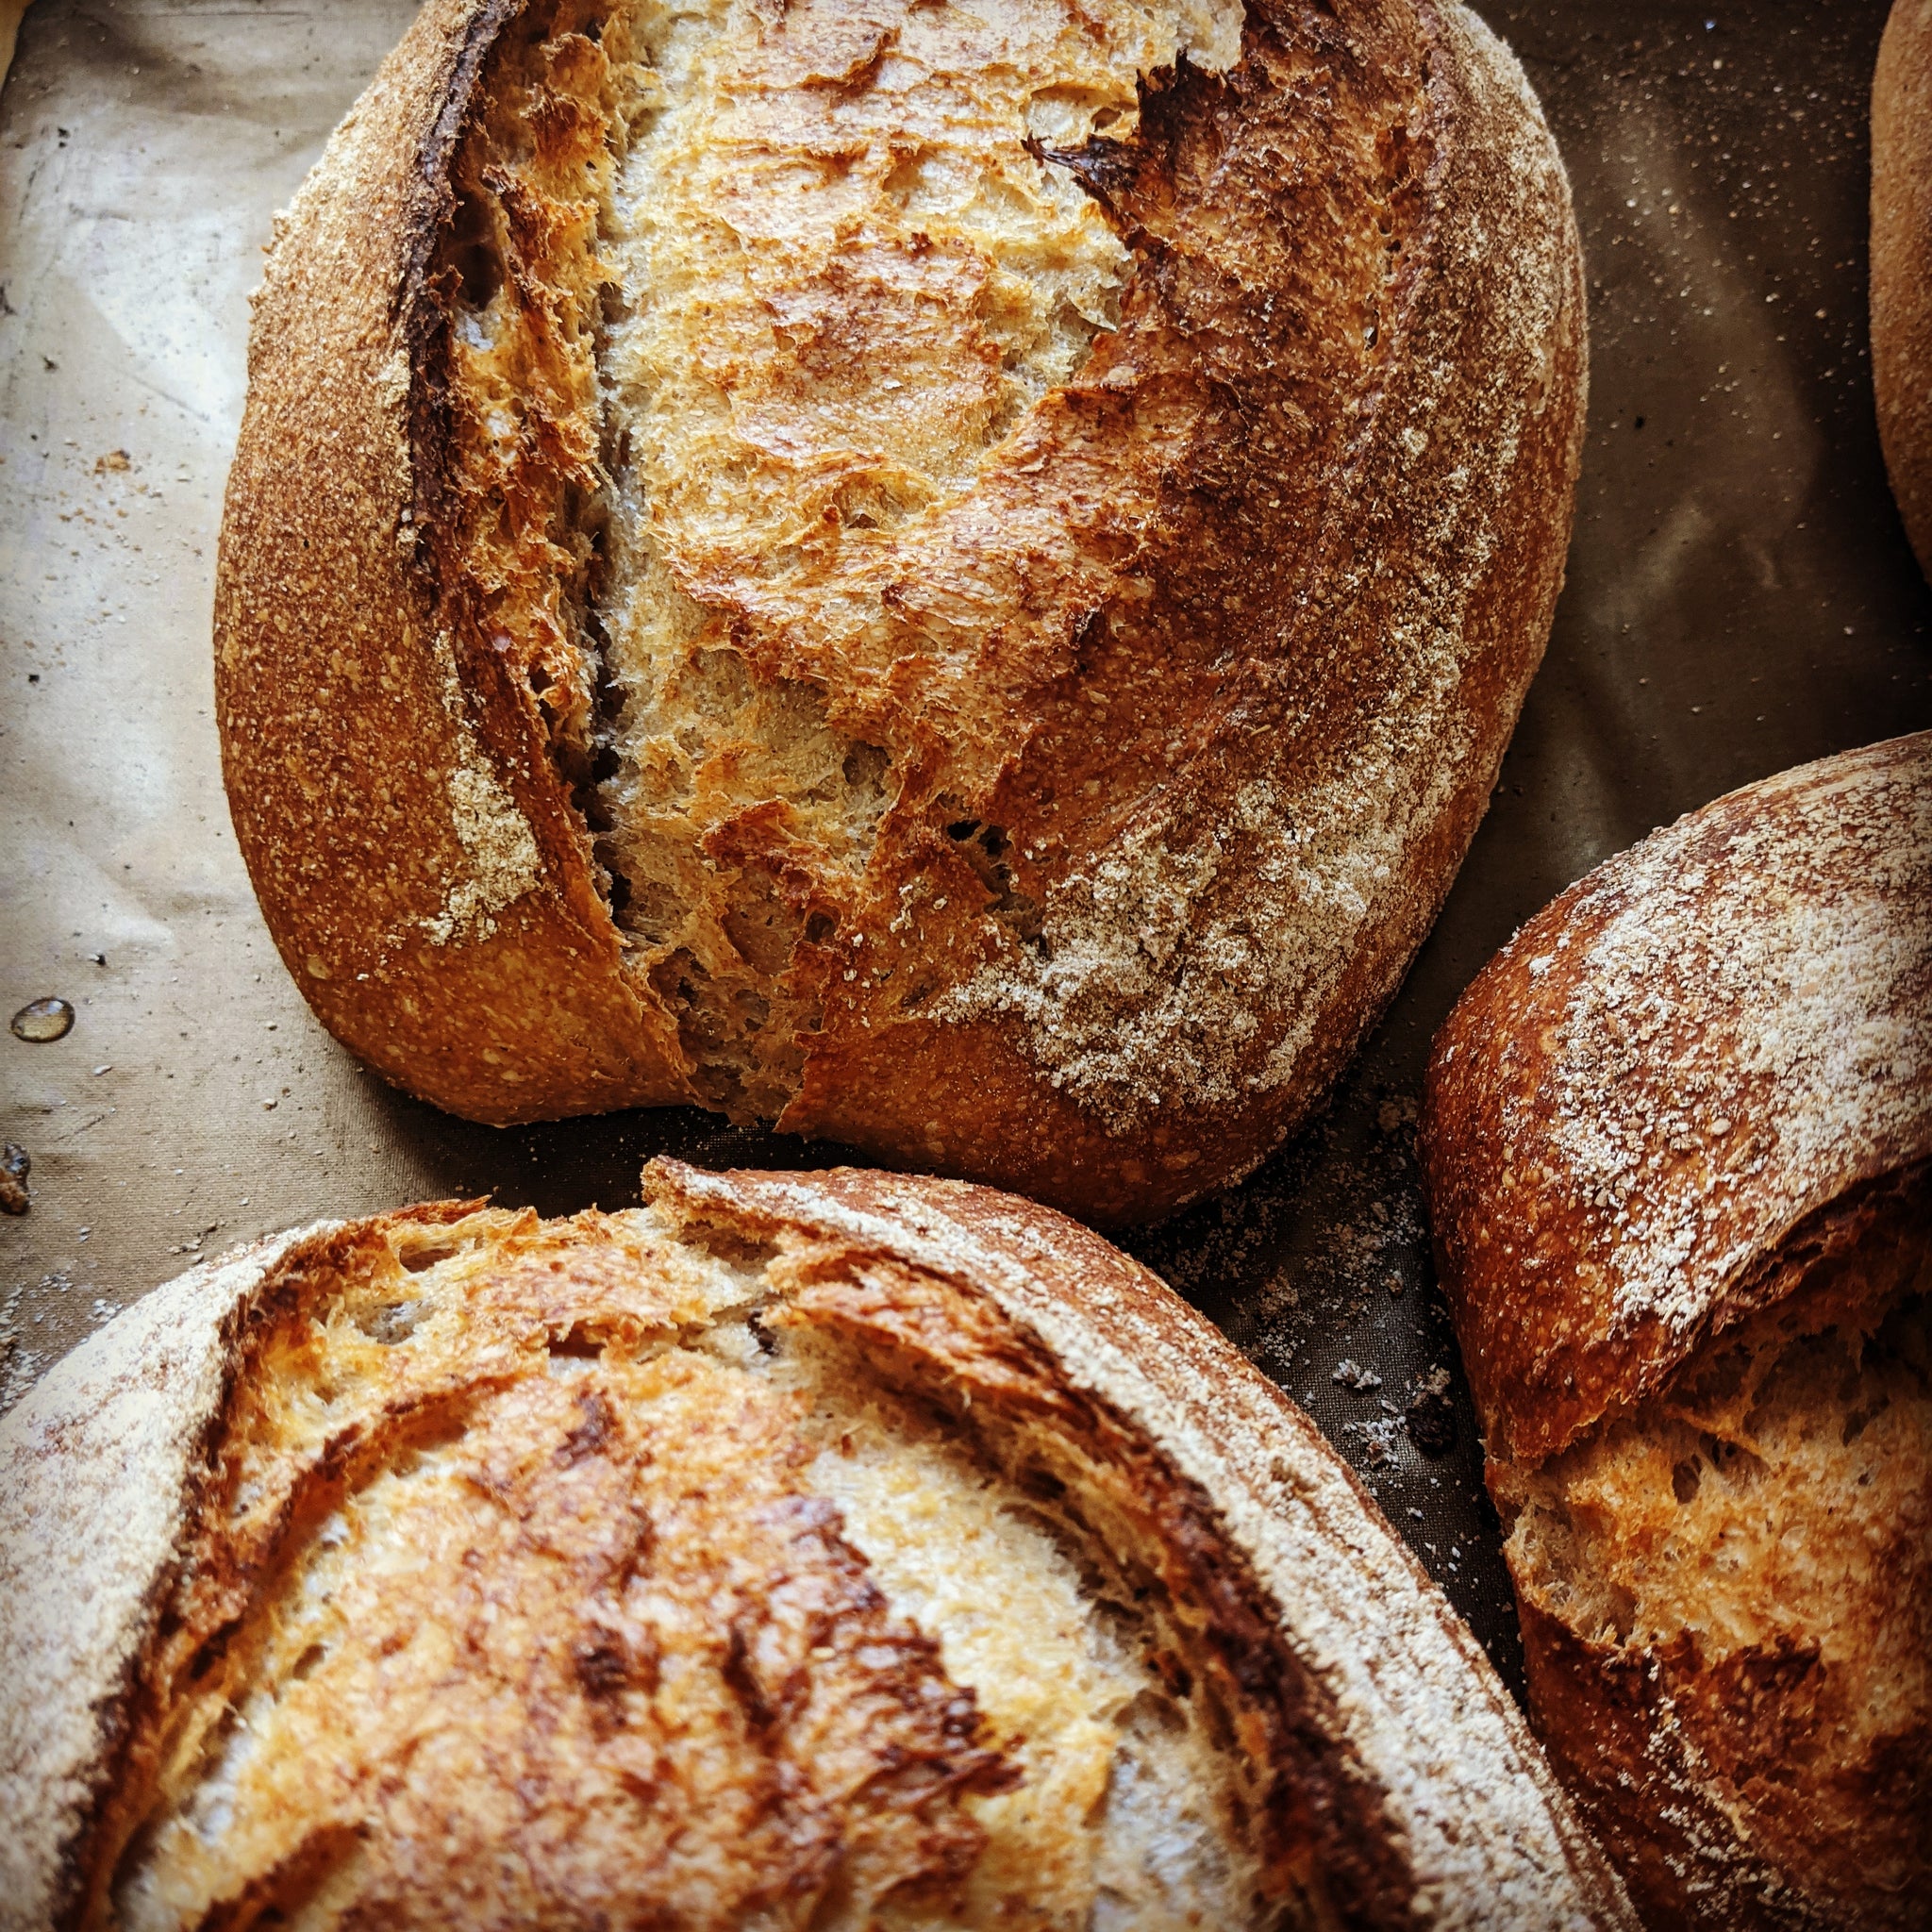 Sourdough special - Saturday only!